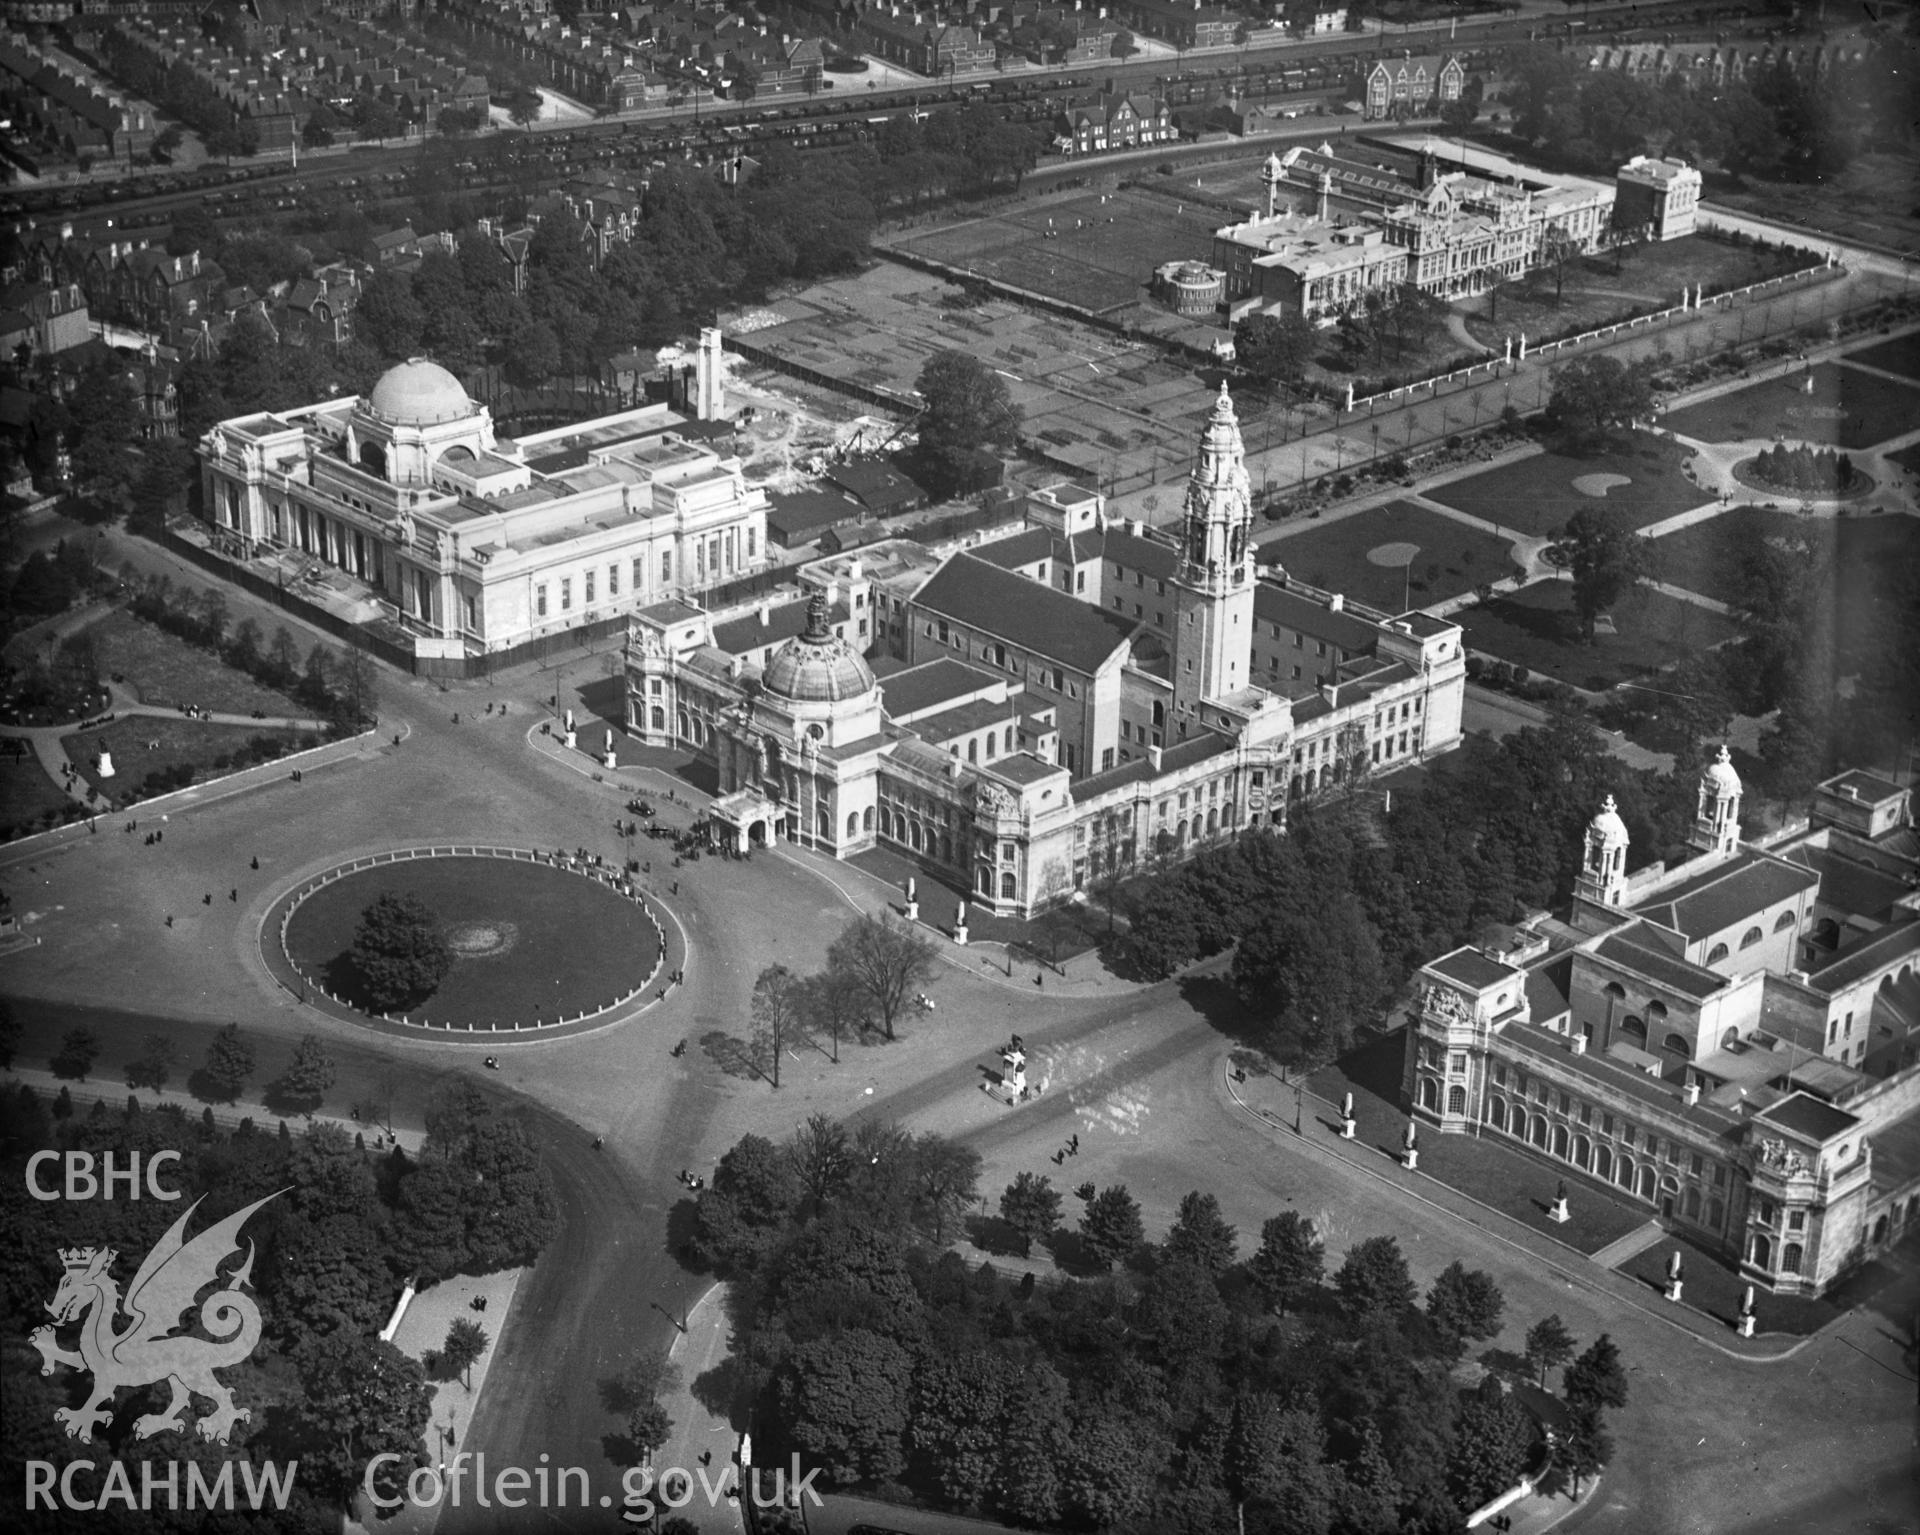 View of Cardiff Civic Centre, Cathays Park. Oblique aerial photograph, 5?x4? BW glass plate.